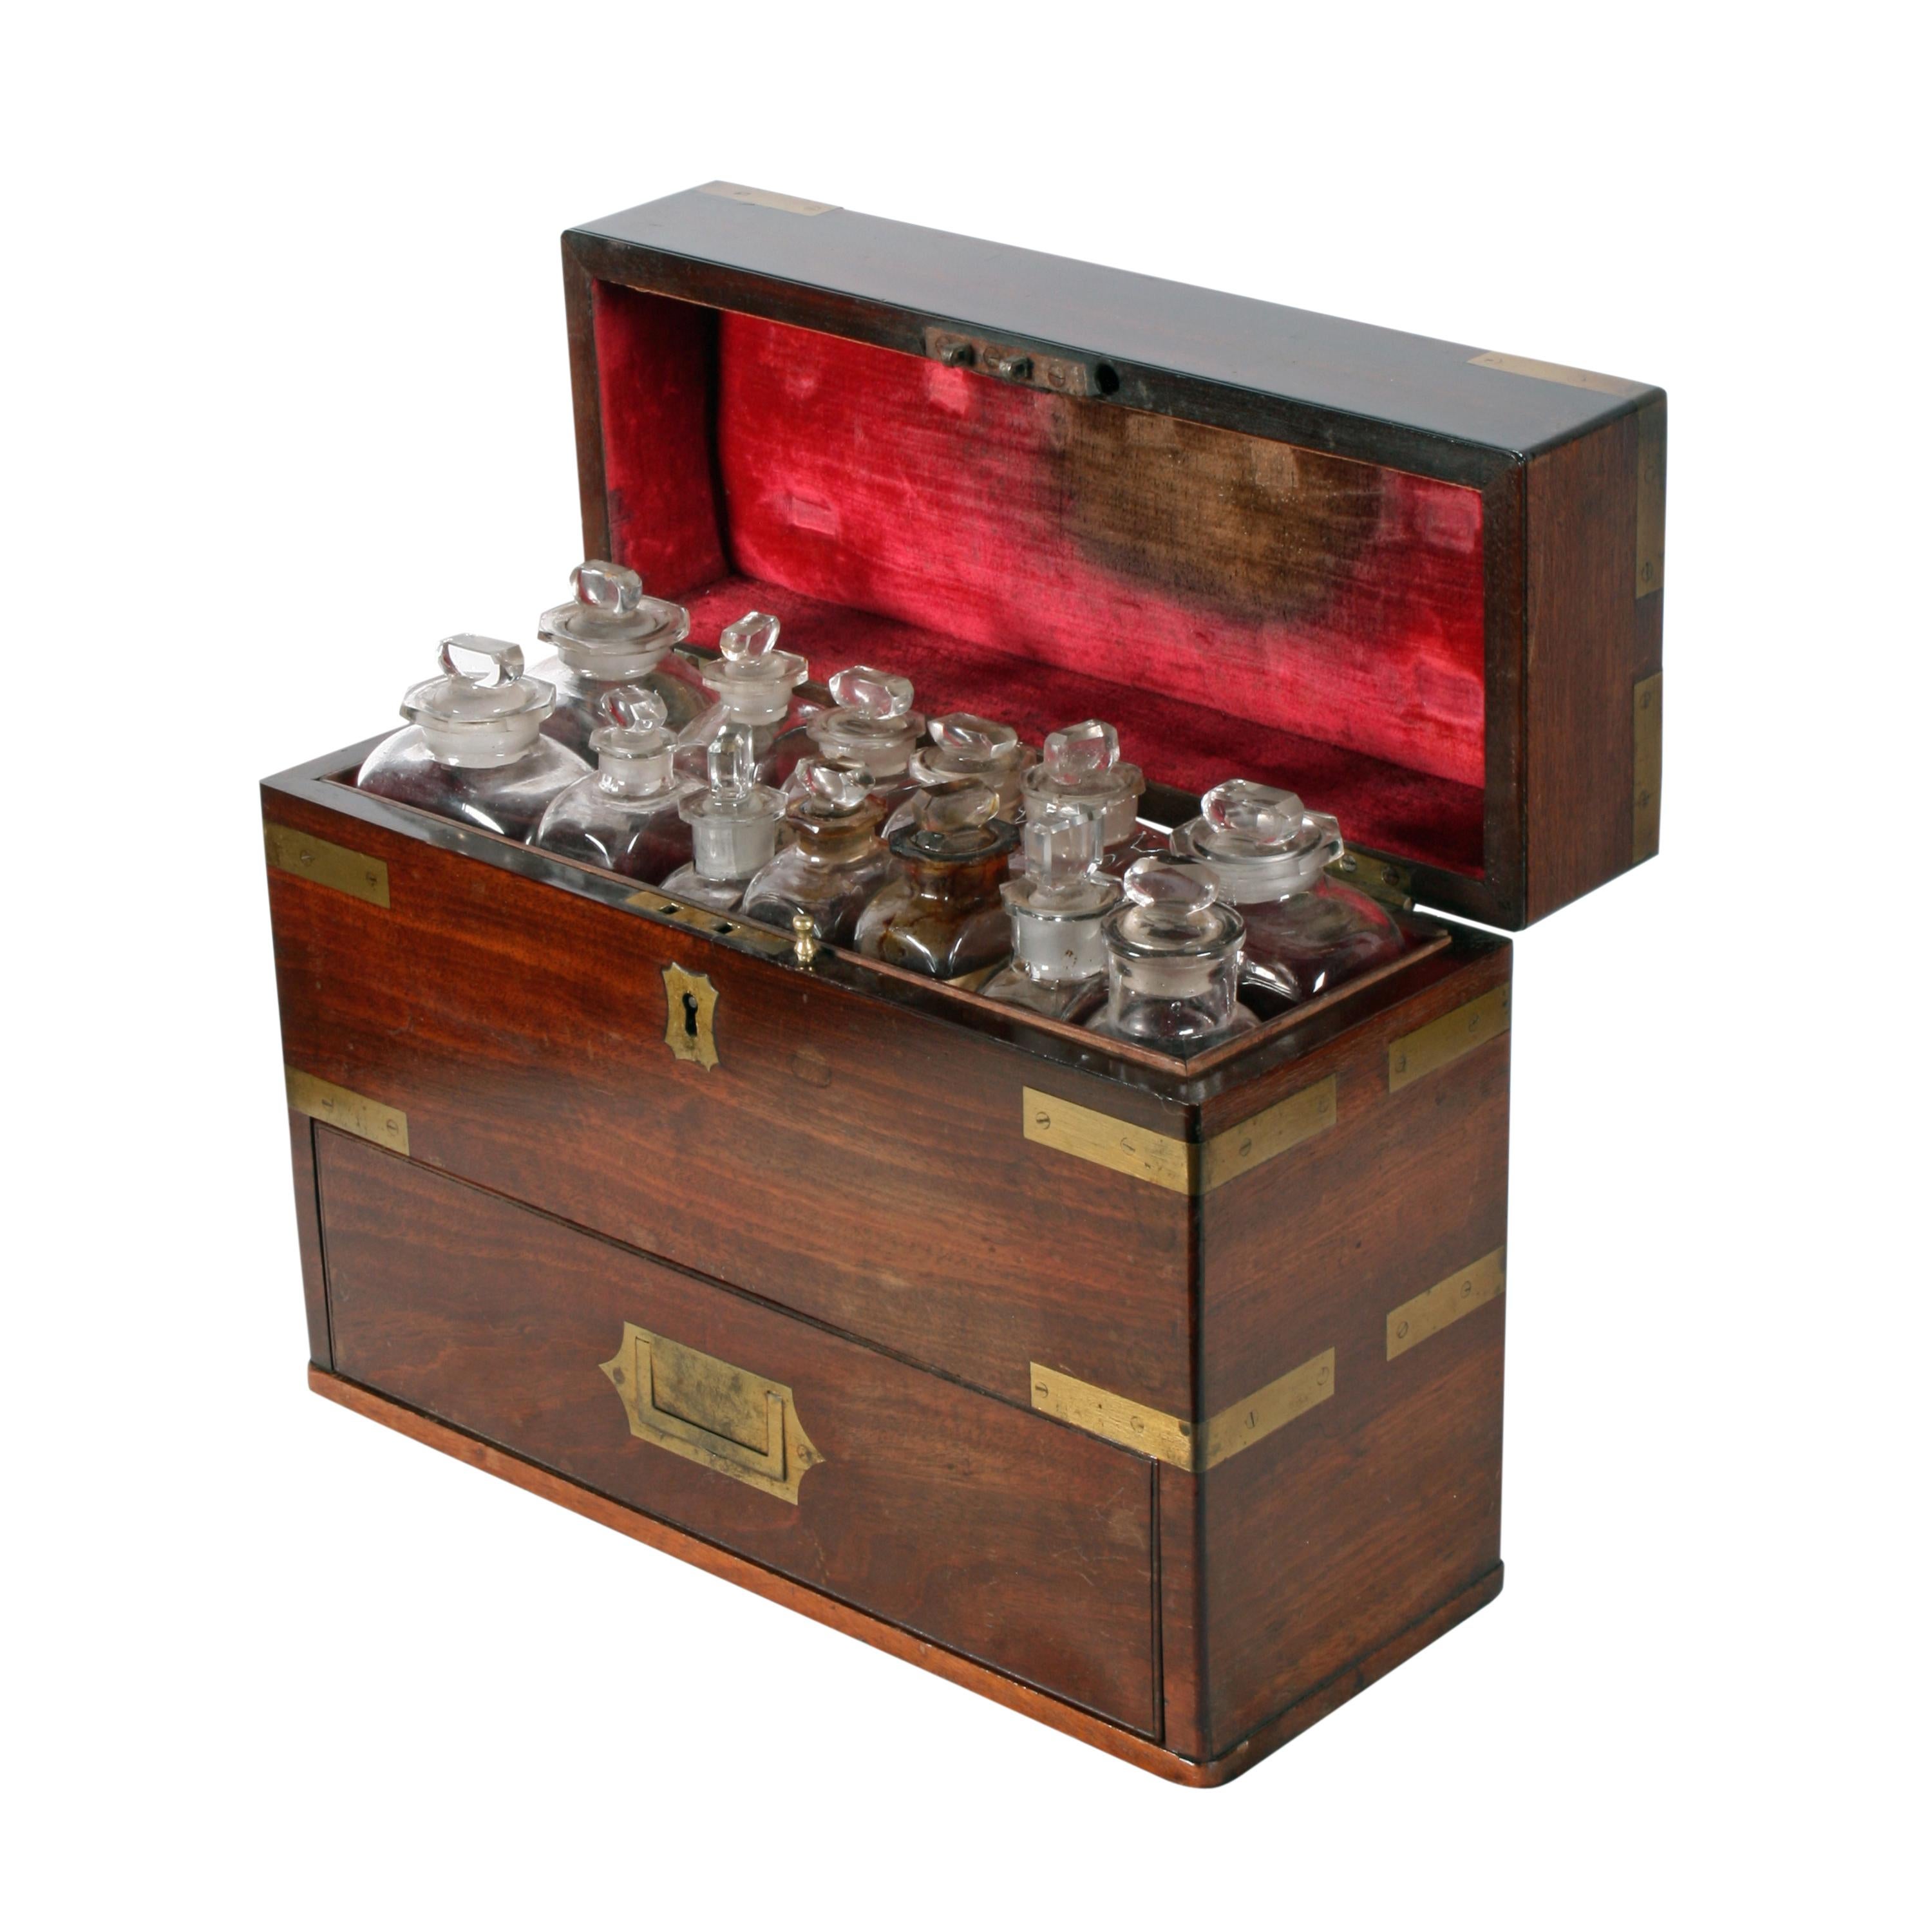 A mid-19th century mahogany brass bound apothecary box or cabinet.

The oblong box has a deep hinged lid and storage compartments that hold thirteen assorted size bottles with glass stoppers.

The bottles are held in velvet lined compartments